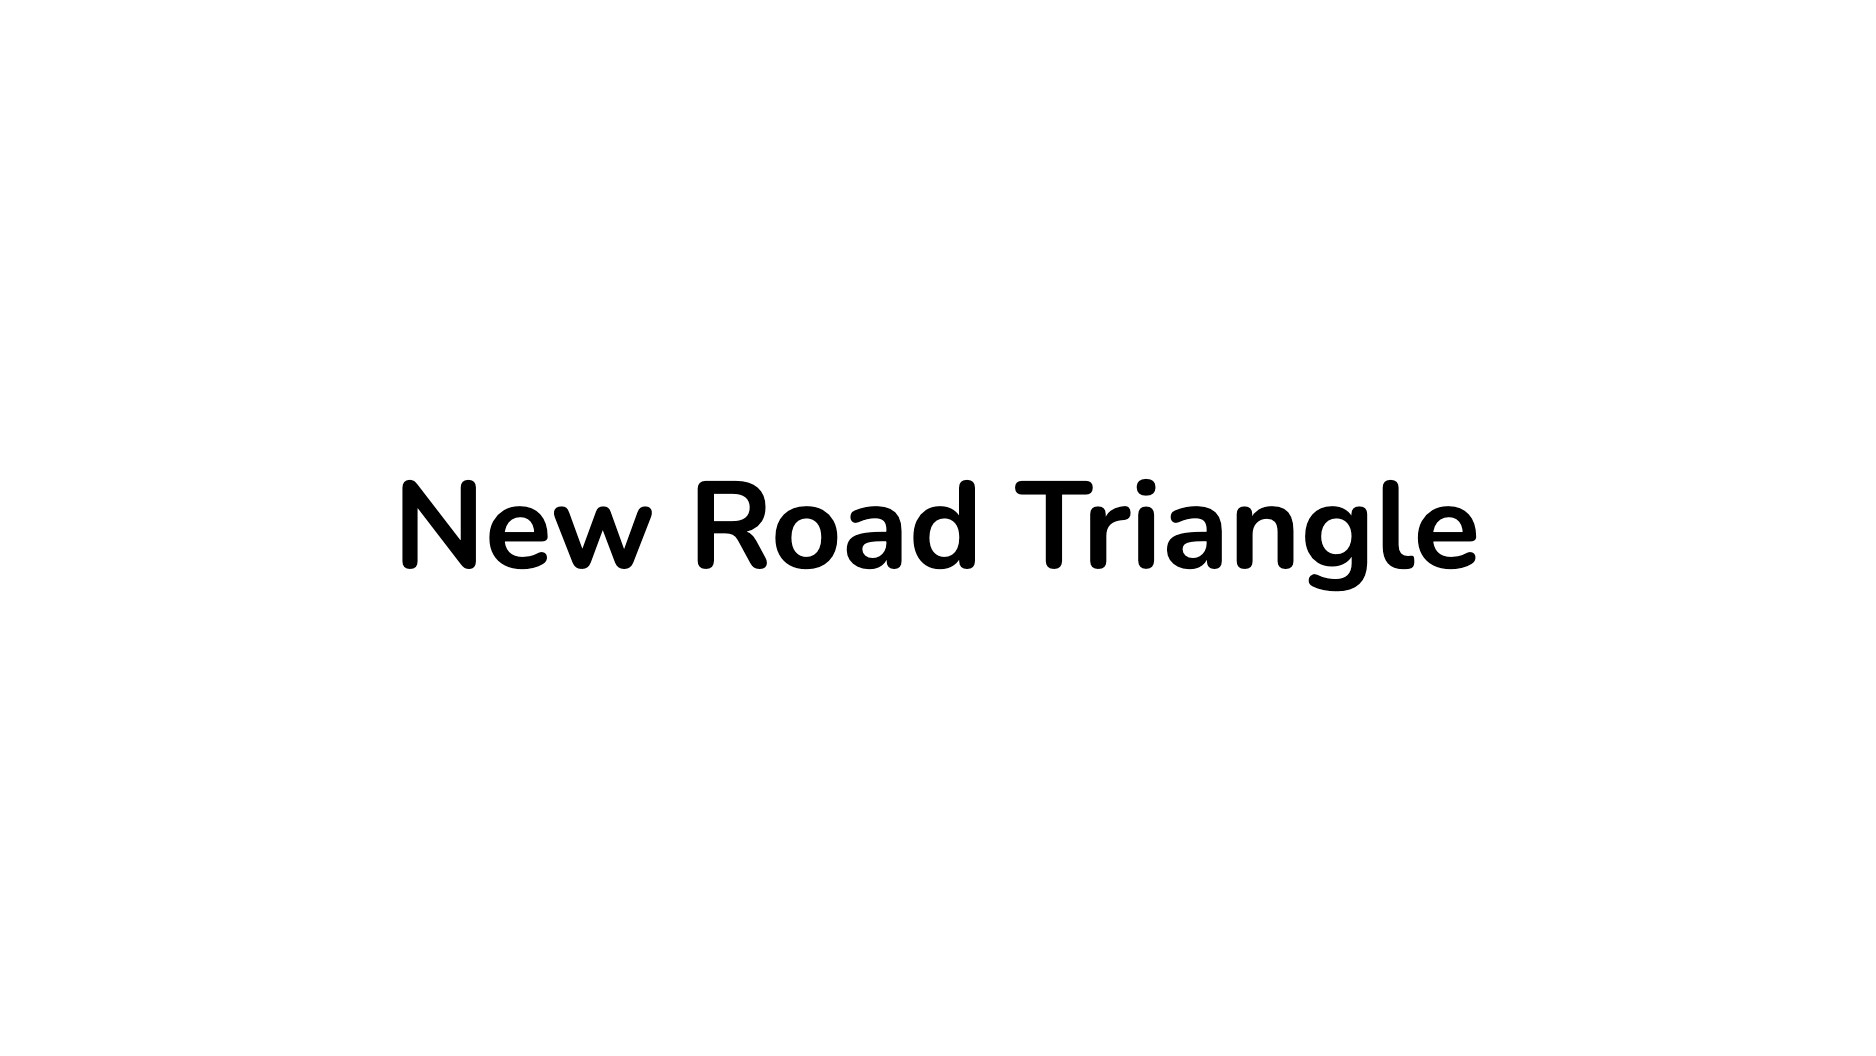 New Road Triangle